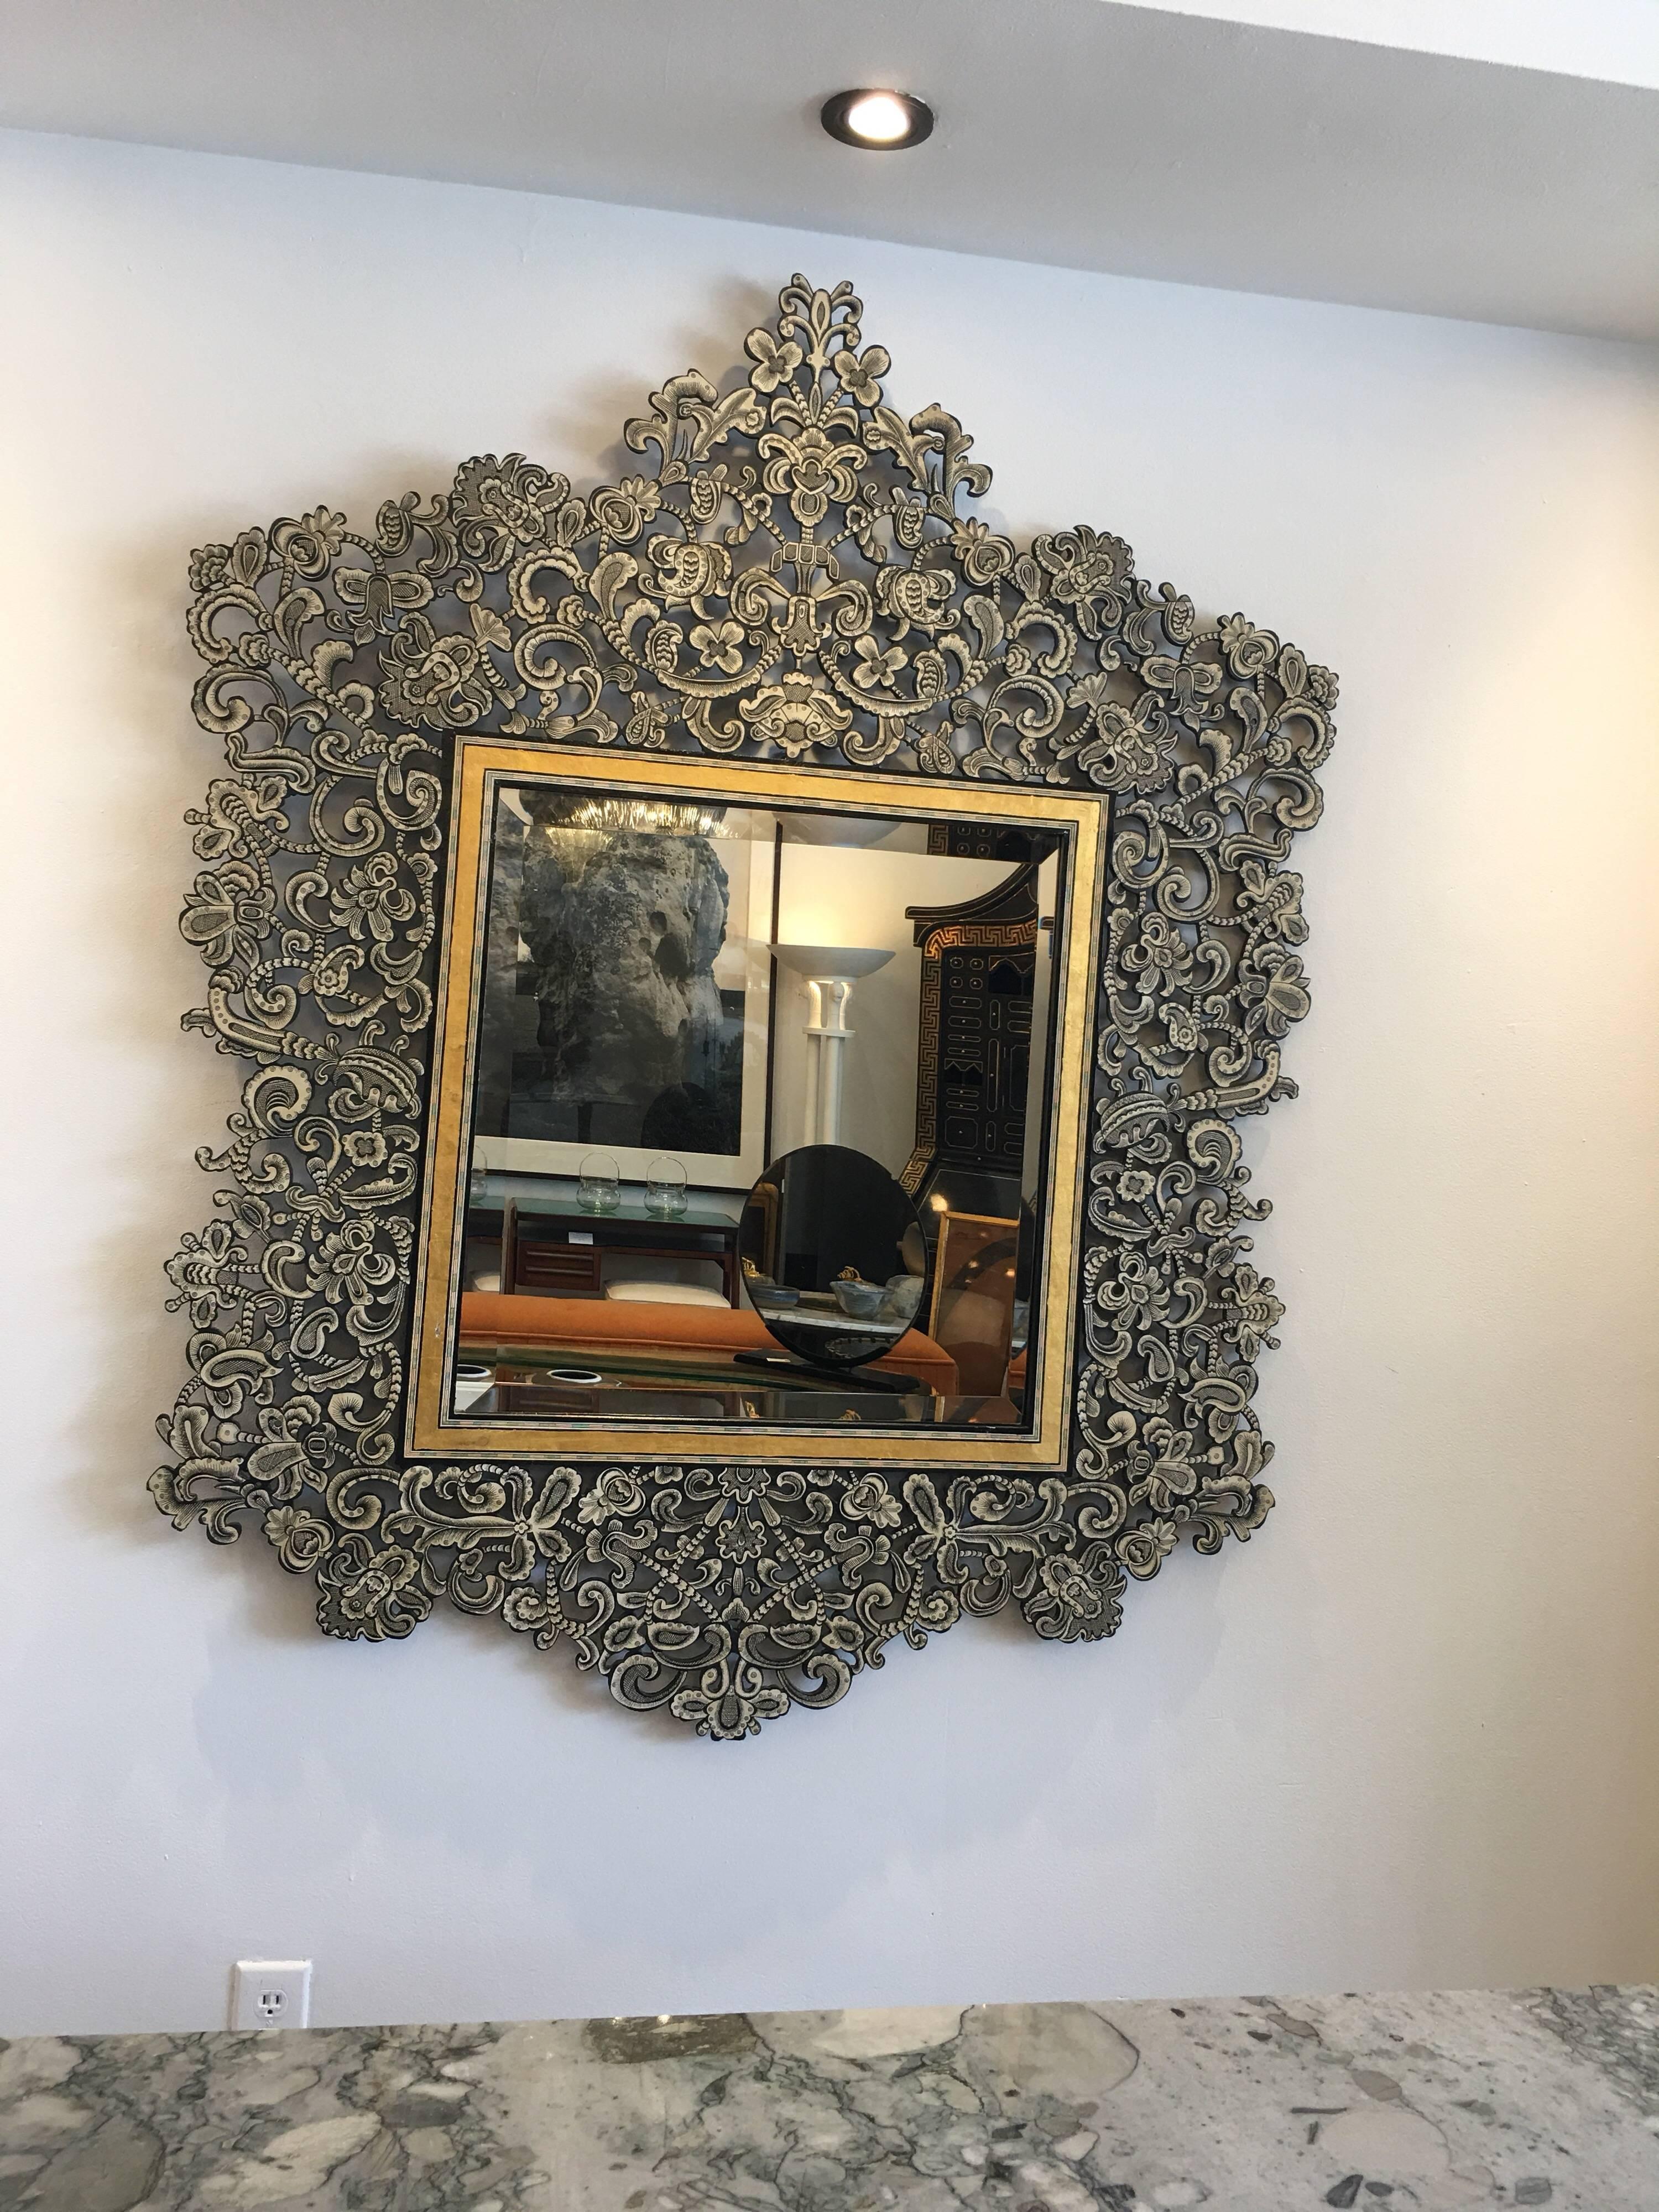 This elaborate stencil cut metal mirror with hand-painted applied paper overlay. Making this a striking statement - large in scale and highly decorative. Large bevelled mirror and gilt inlay framed mirror.